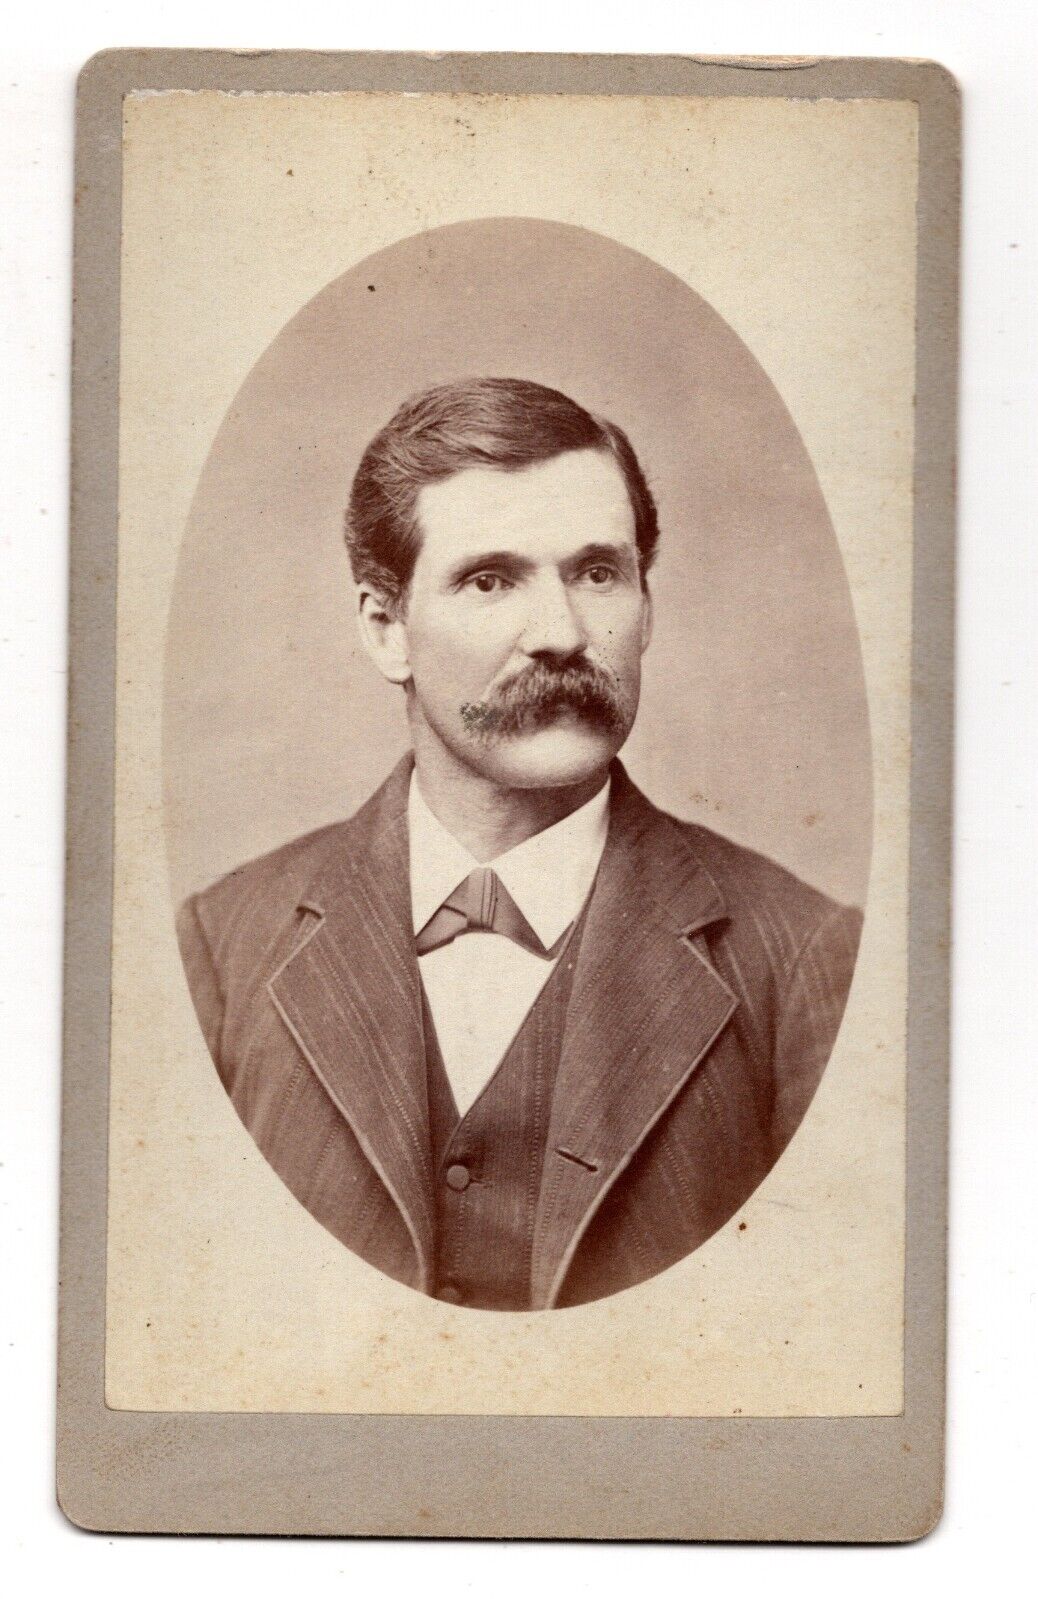 ANTIQUE CDV C. 1870s HANDSOME MAN IN SUIT WITH MUSTACHE SAN FRANCISCO CALIFORNIA